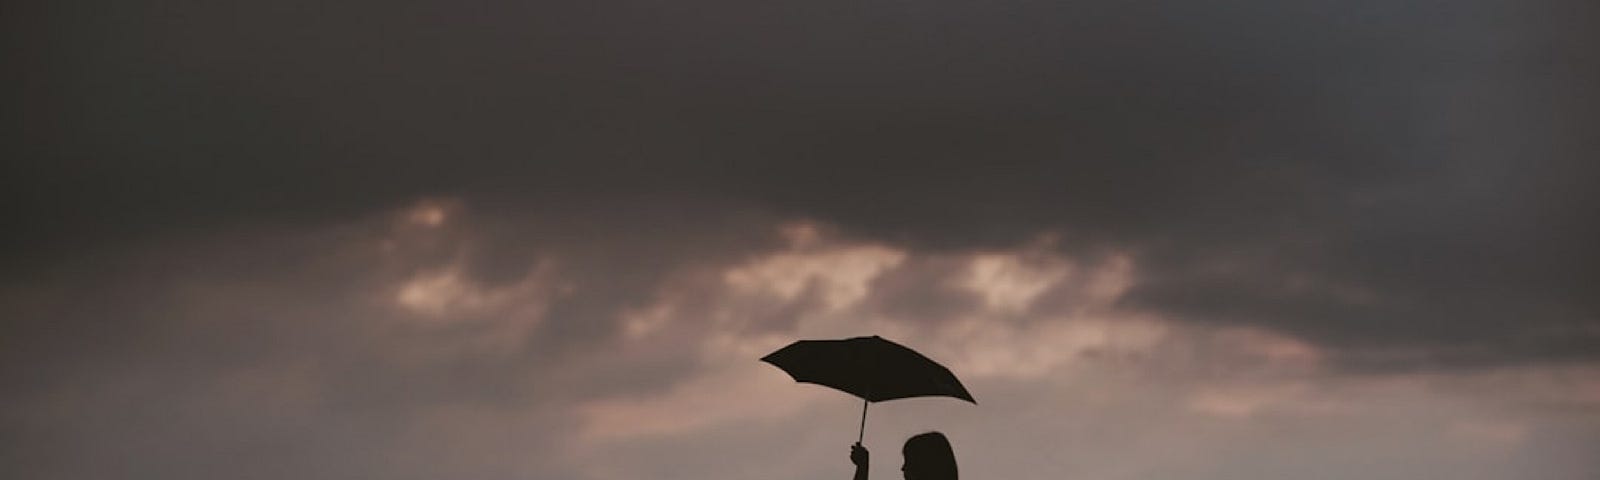 Two children, one taller than the other, are silhouetted against a cloudy sky, holding an umbrella.